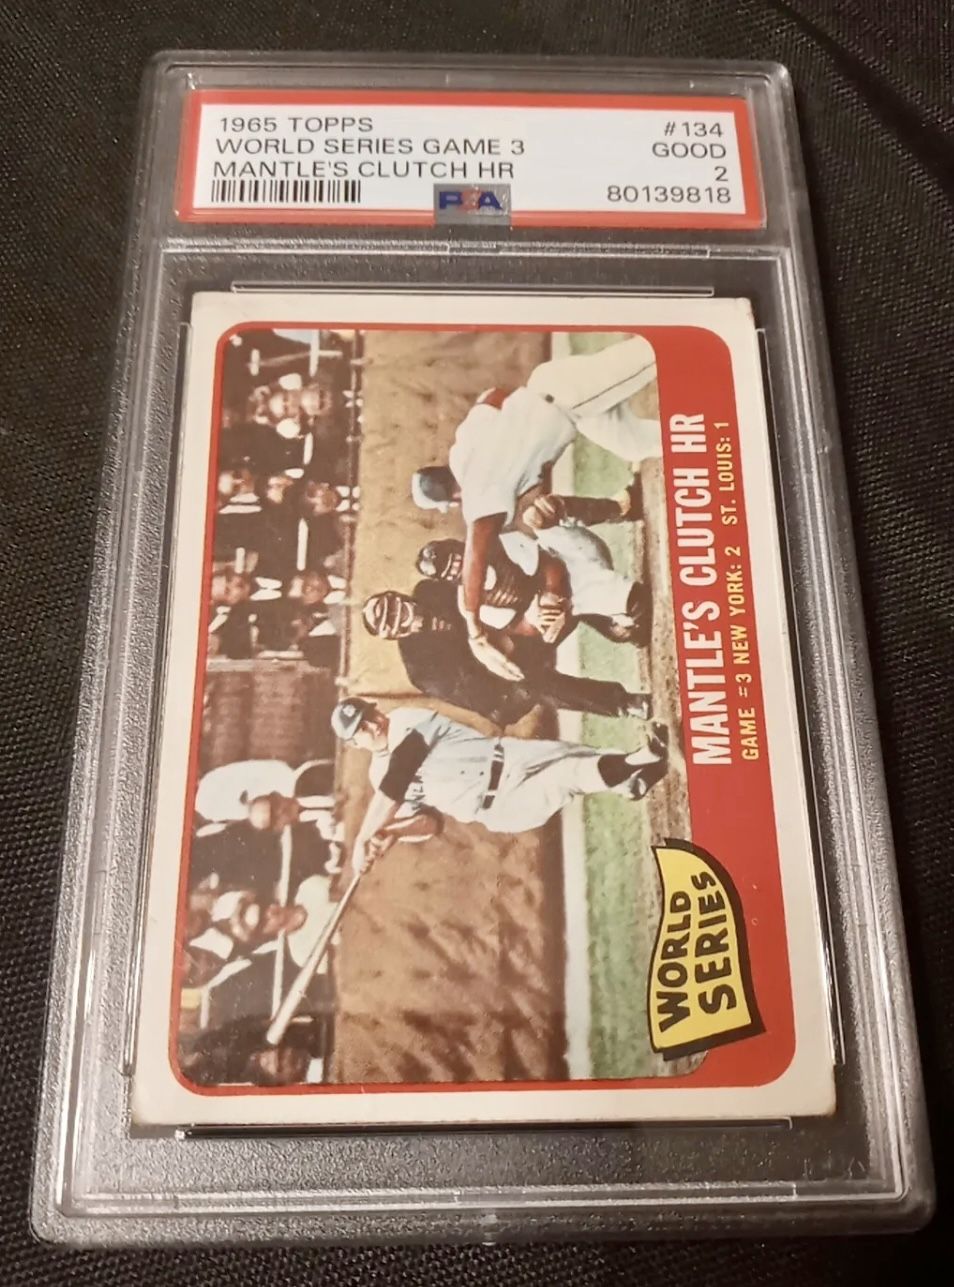 1965 TOPPS MICKEY MANTLE CLUTCH HOMER WORLD SERIES GAME 3 #134 PSA 2